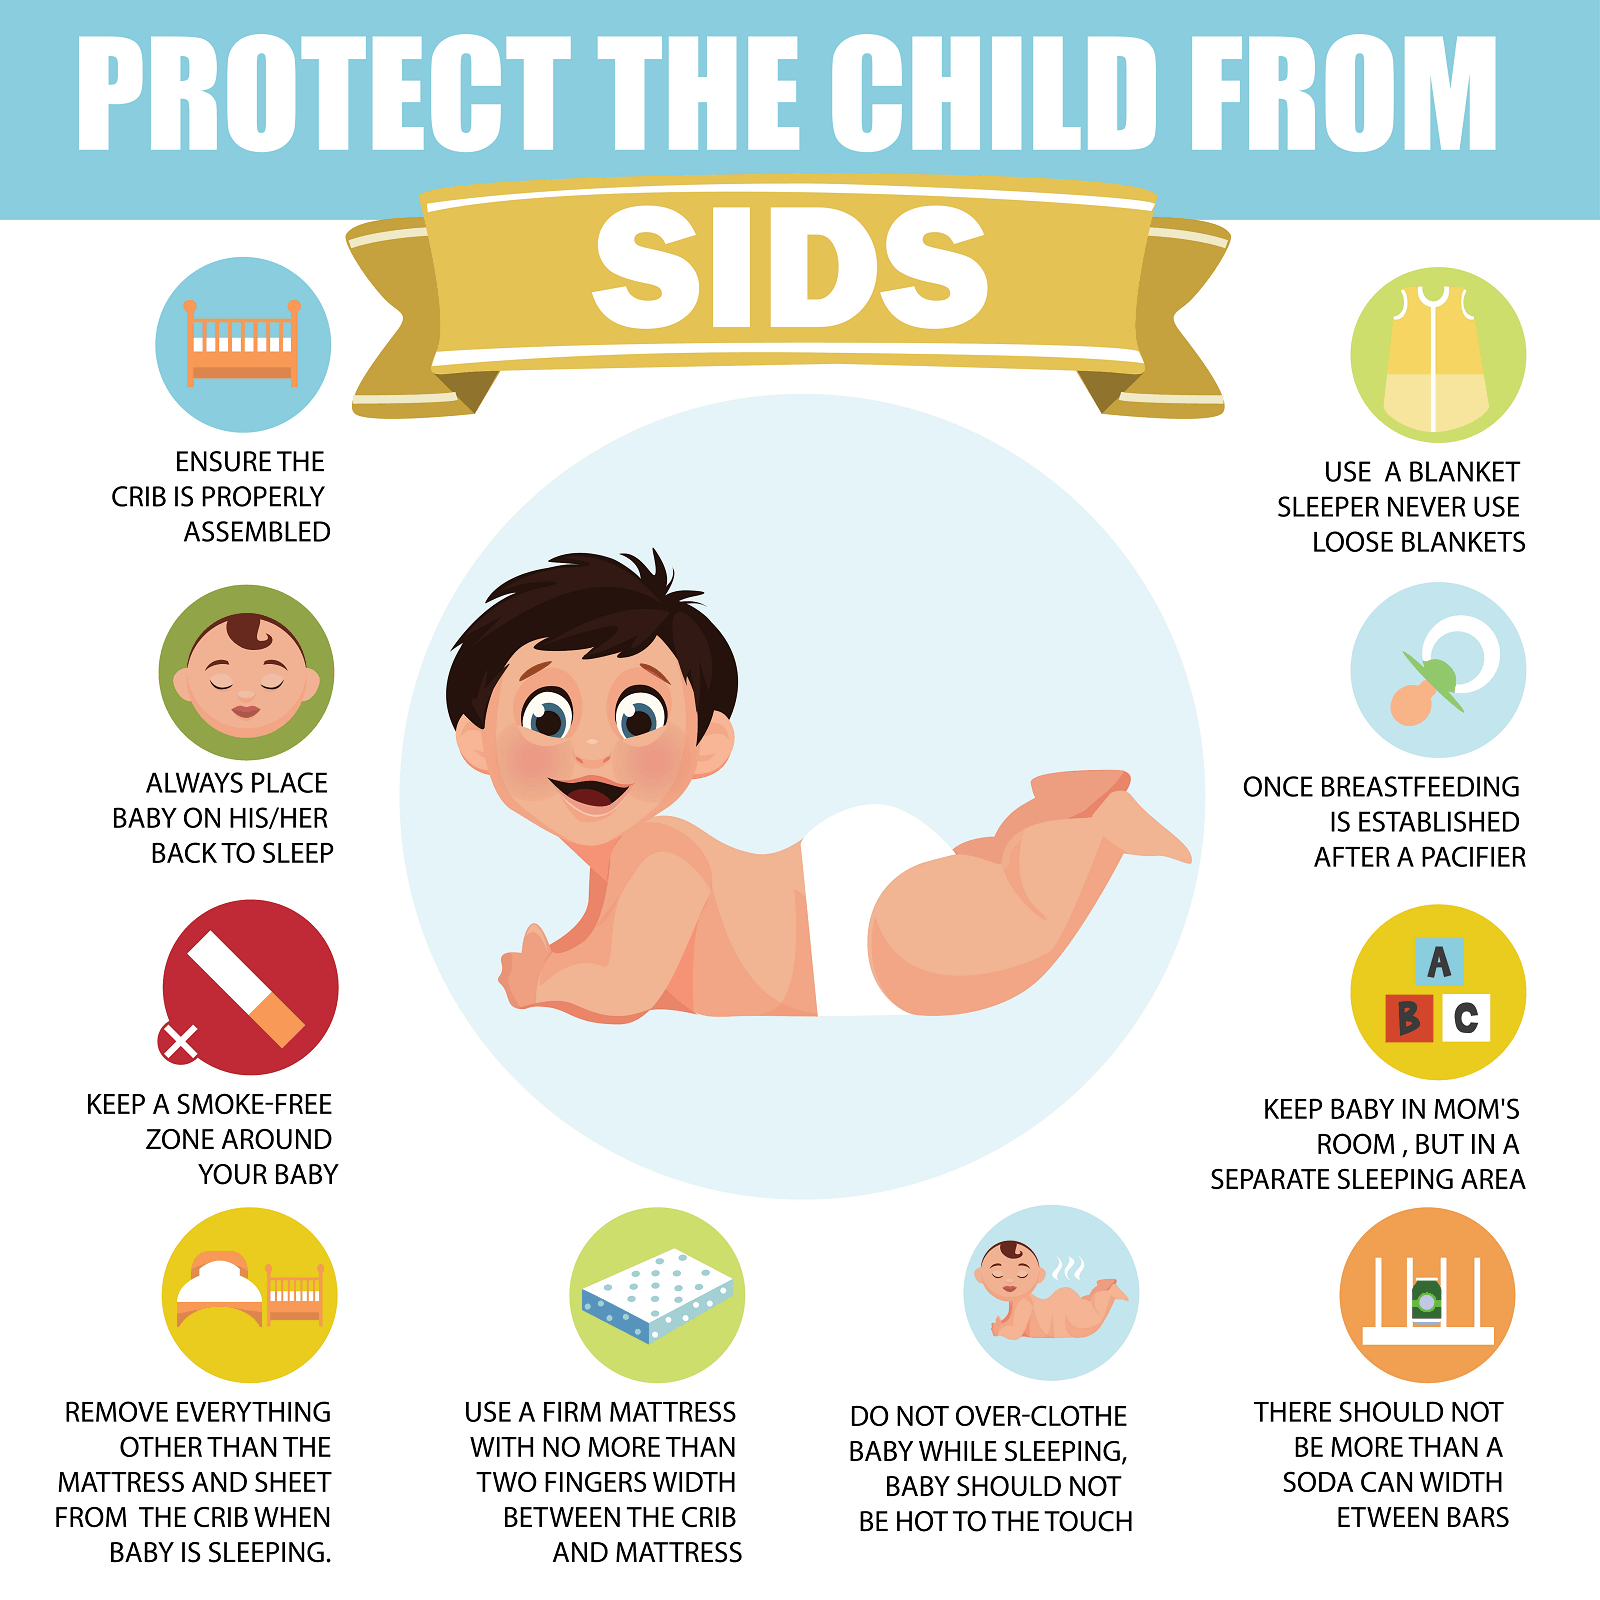 How to Protect the child from SIDS